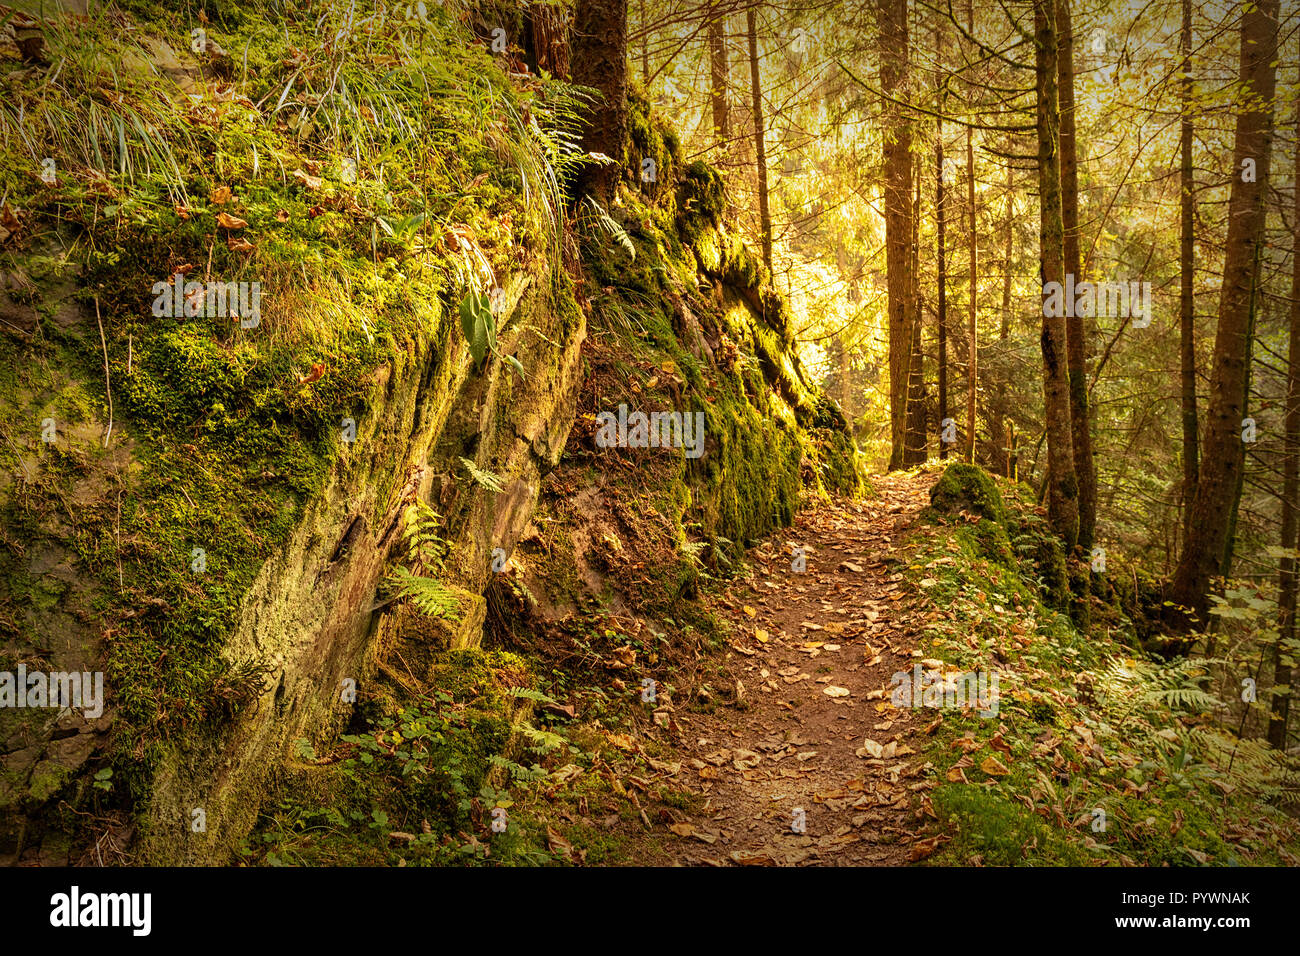 Hiking impression in the Black Forest along the Roetenbach in Autumn, Germany. Magical Autumn Forrest. Colorful Fall Leaves. Romantic Background. Hiki Stock Photo